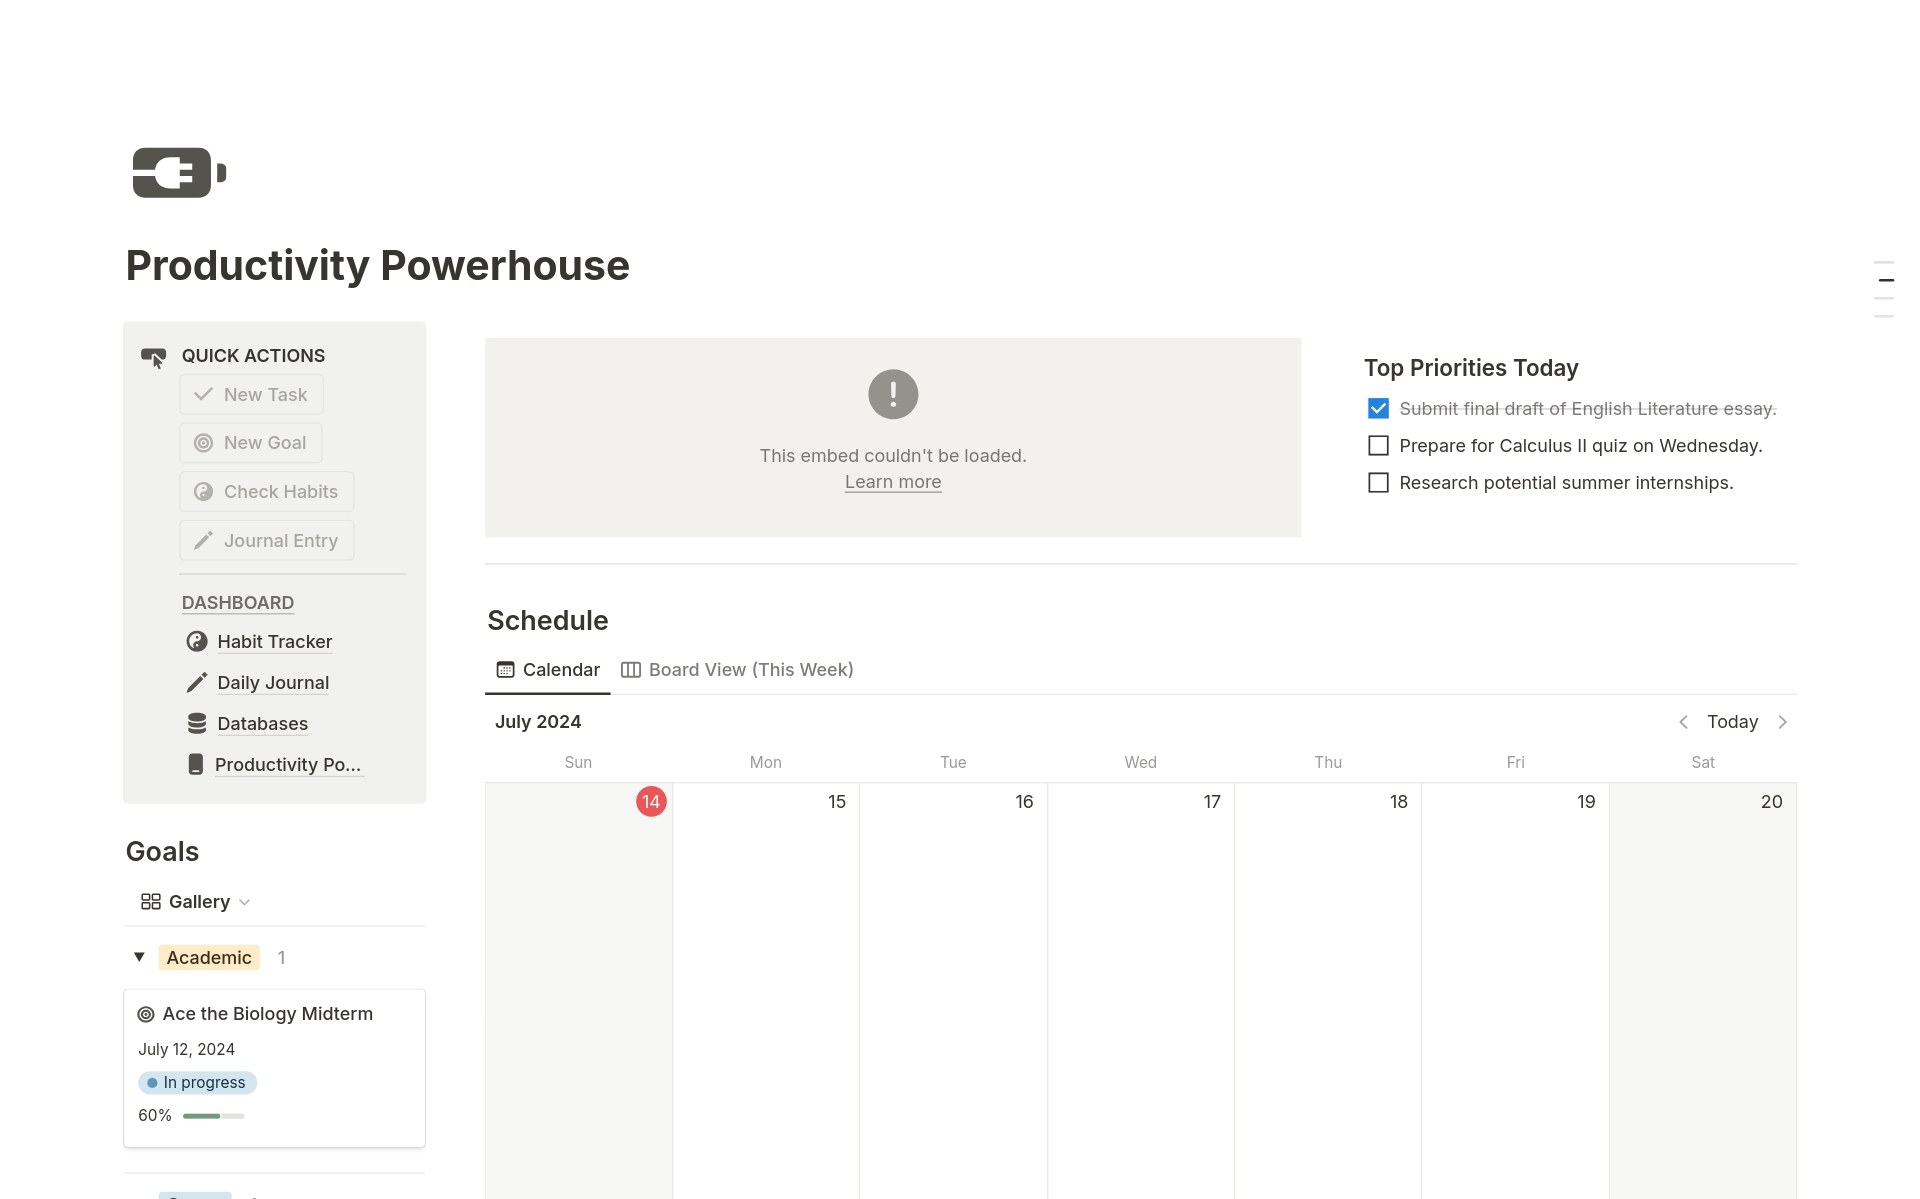 Tired of feeling overwhelmed by your to-do list? Wish you had more time in the day to achieve your goals? The Productivity Powerhouse template is your all-in-one solution for taking charge of your time, boosting productivity, and creating a life you love.